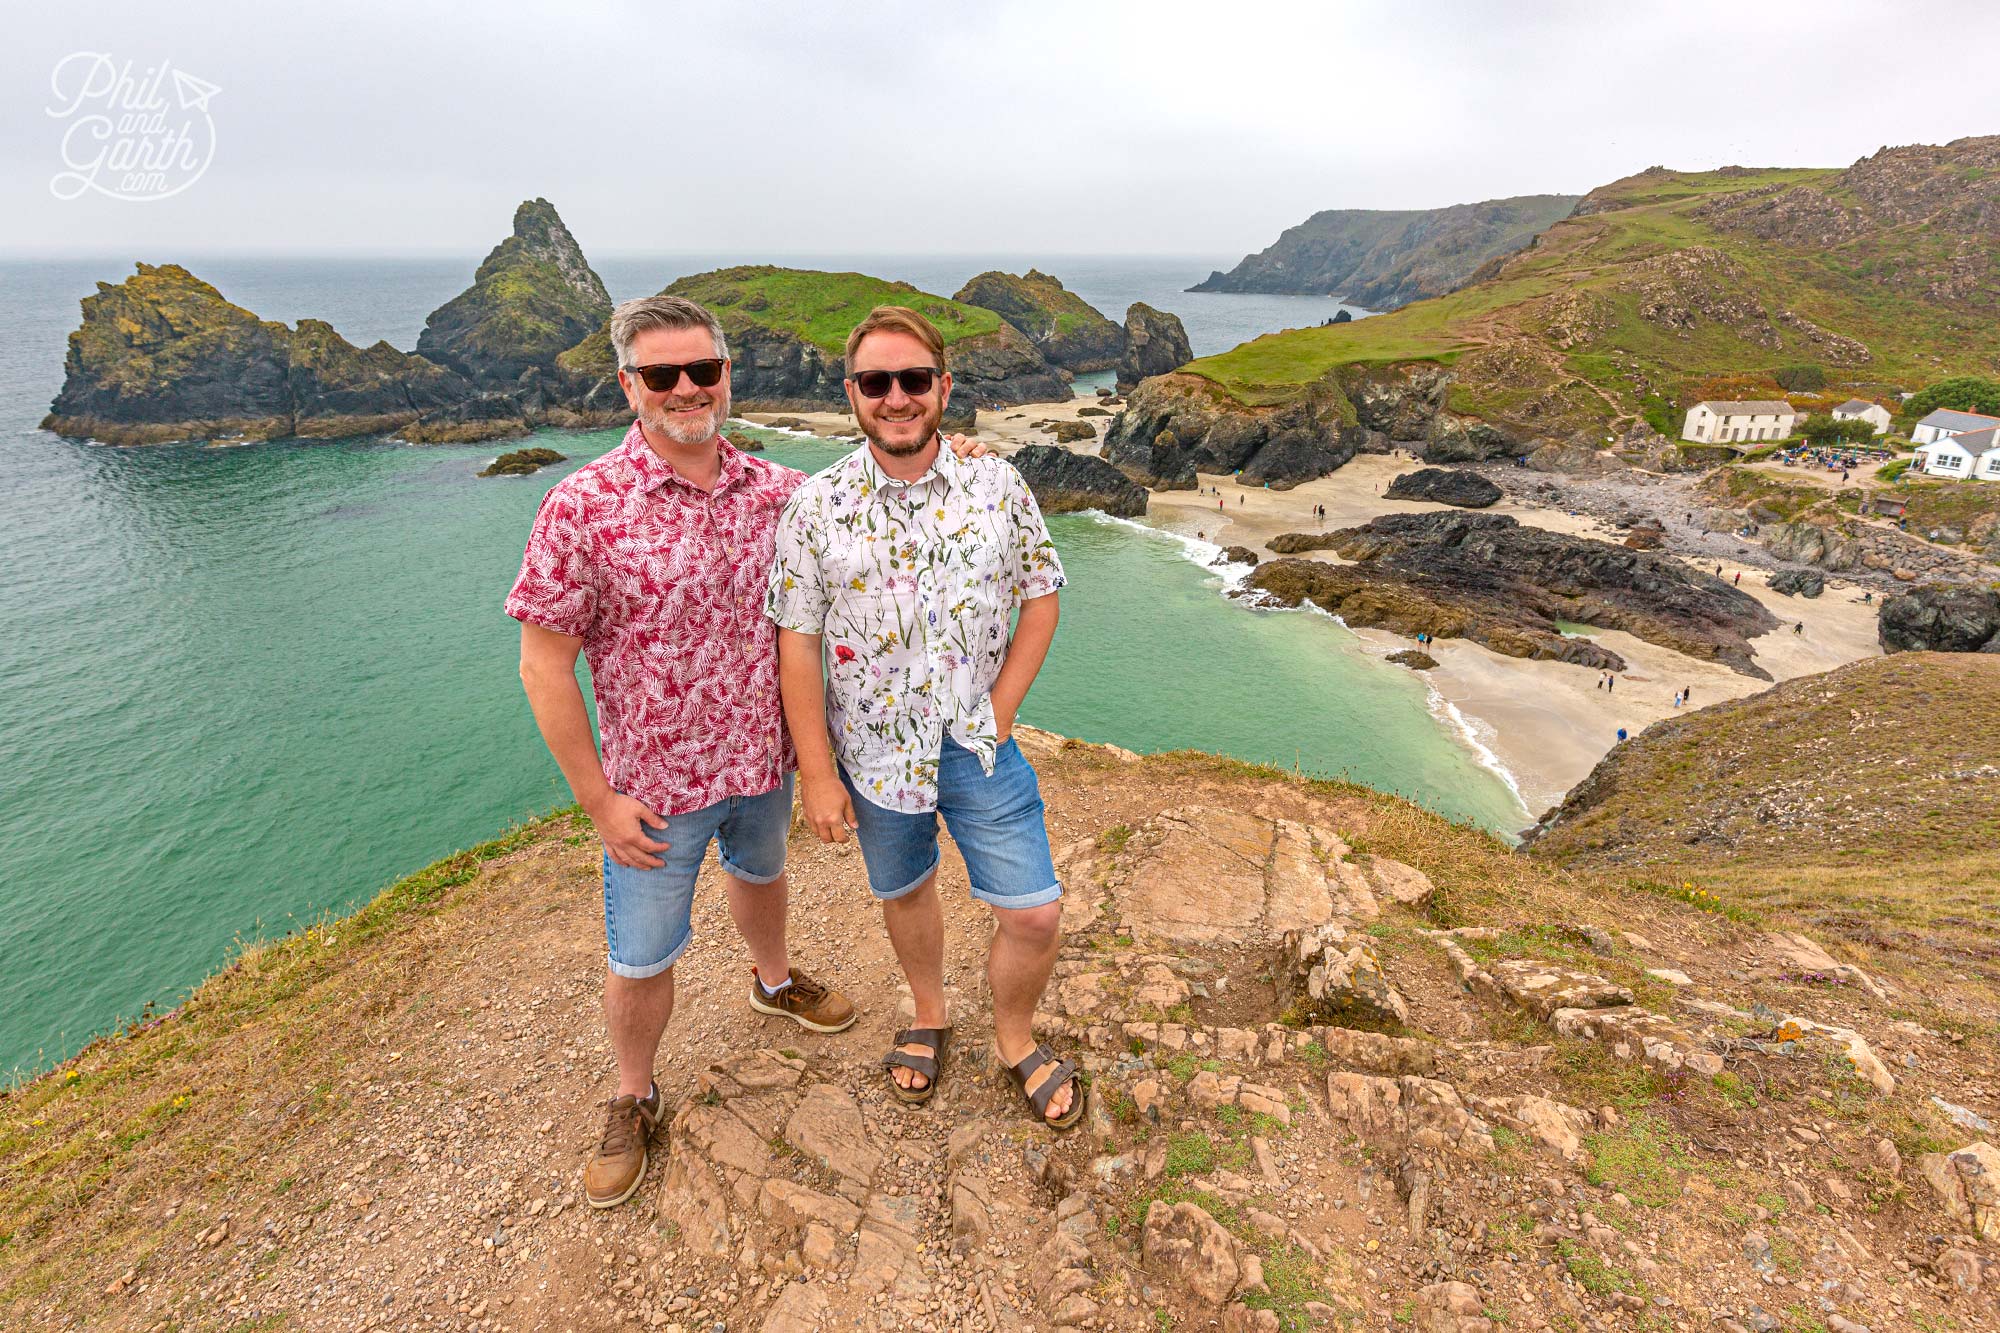 Kynance Cove on the Lizard peninsula is famous for its turquoise waters and rocky stacks